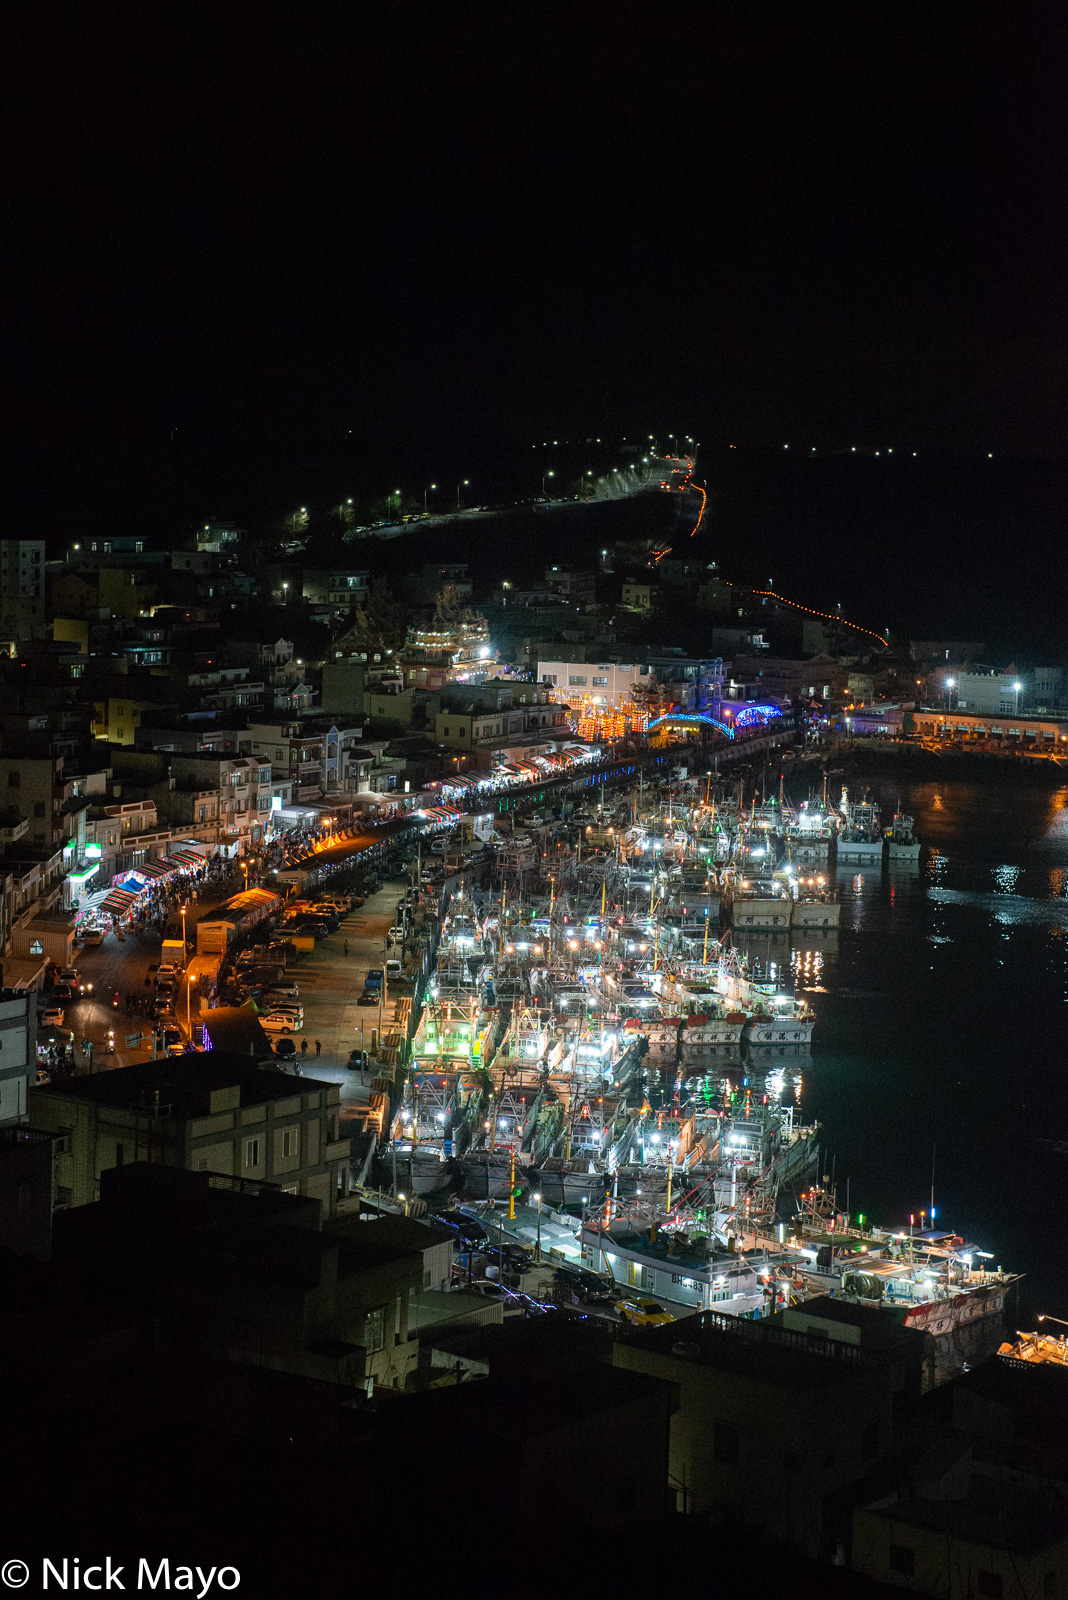 Fishing boats in Wai'an harbour lit up for a festival.